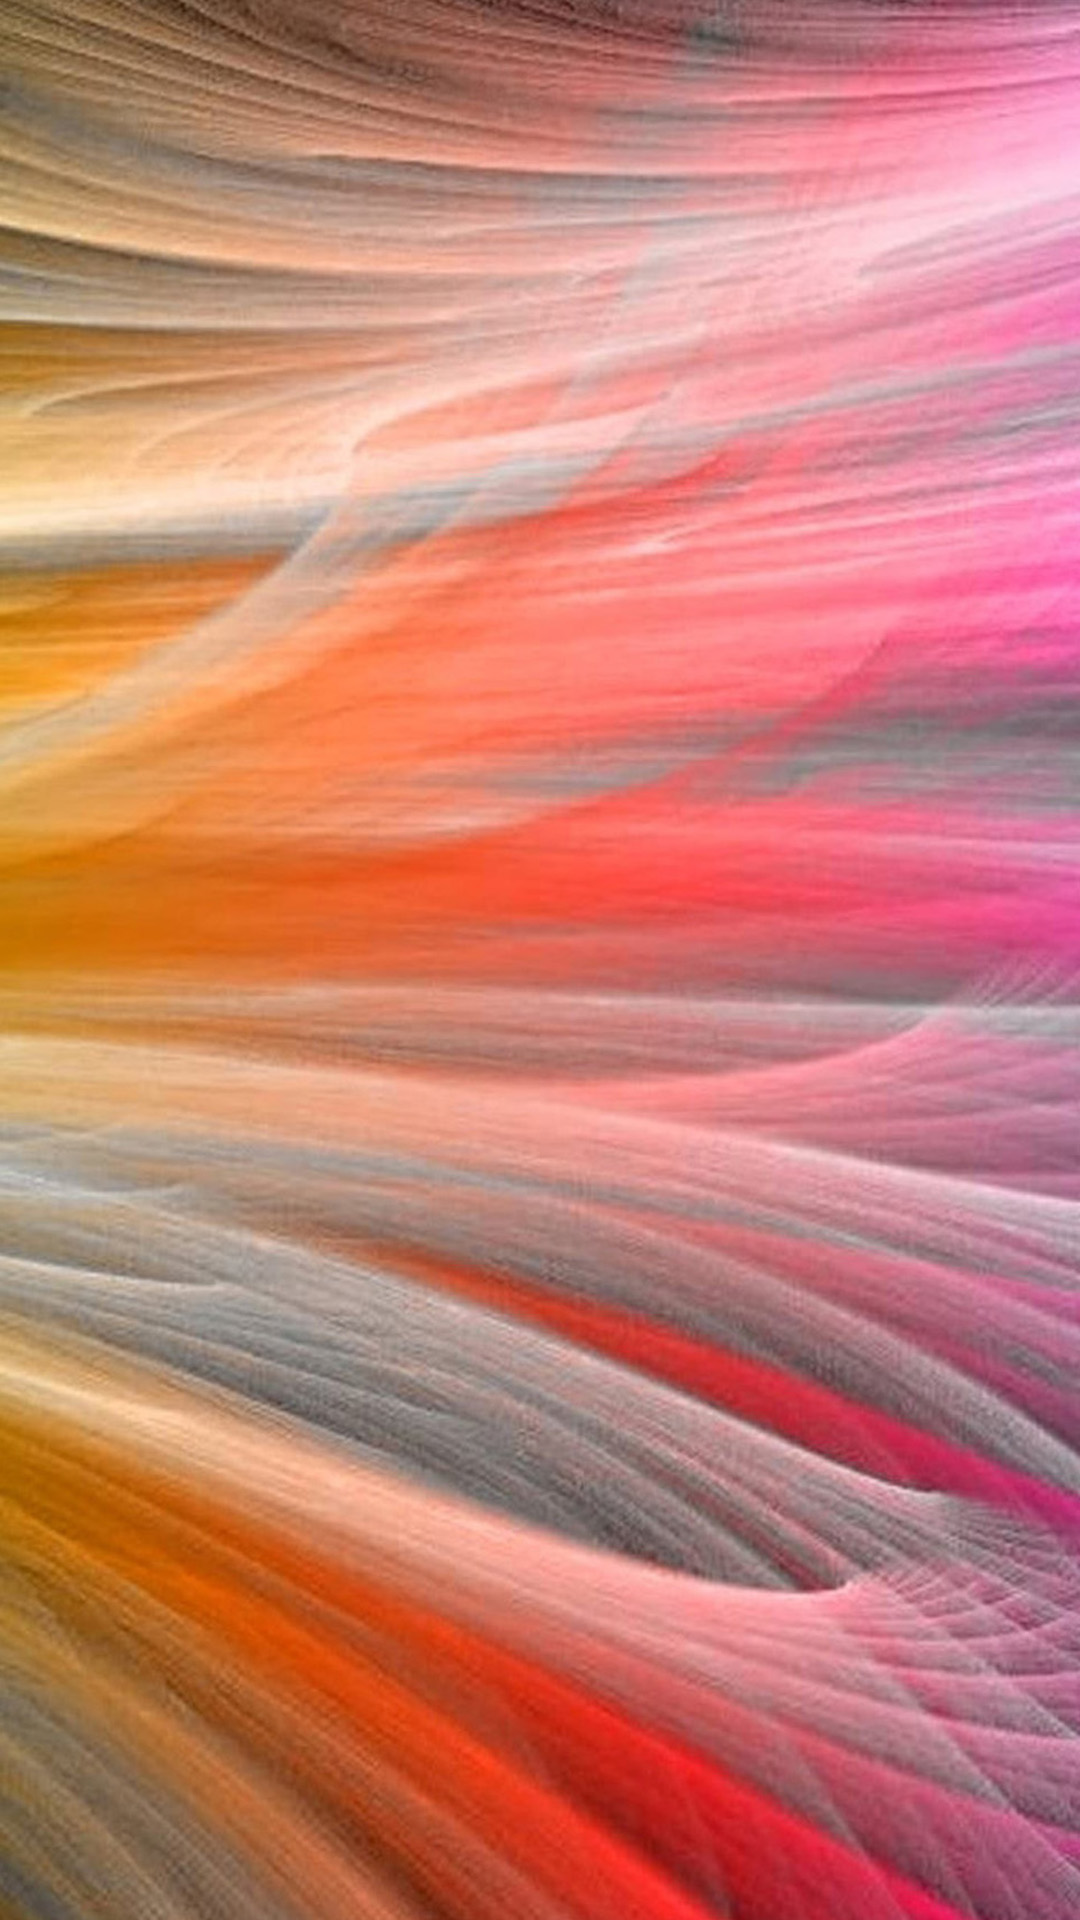 Colorful 268 Android Wallpaper - Pink Orange And Red Iphone - HD Wallpaper 